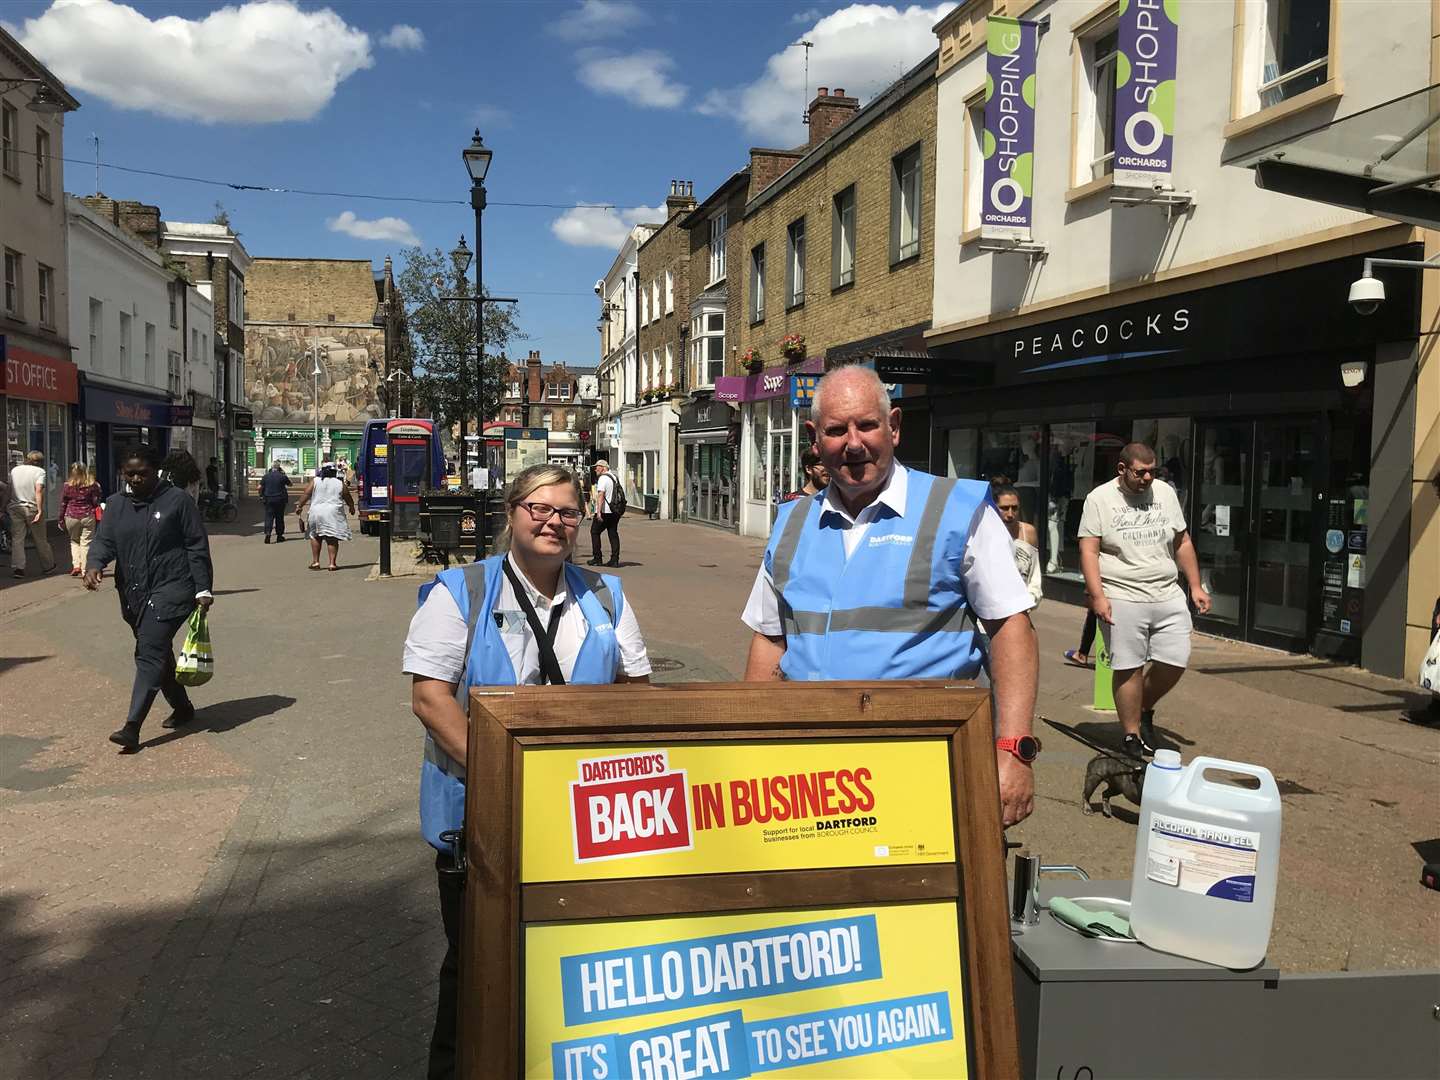 There was a hand sanitiser station with an information board and greeters offering safety advice in Dartford High Street